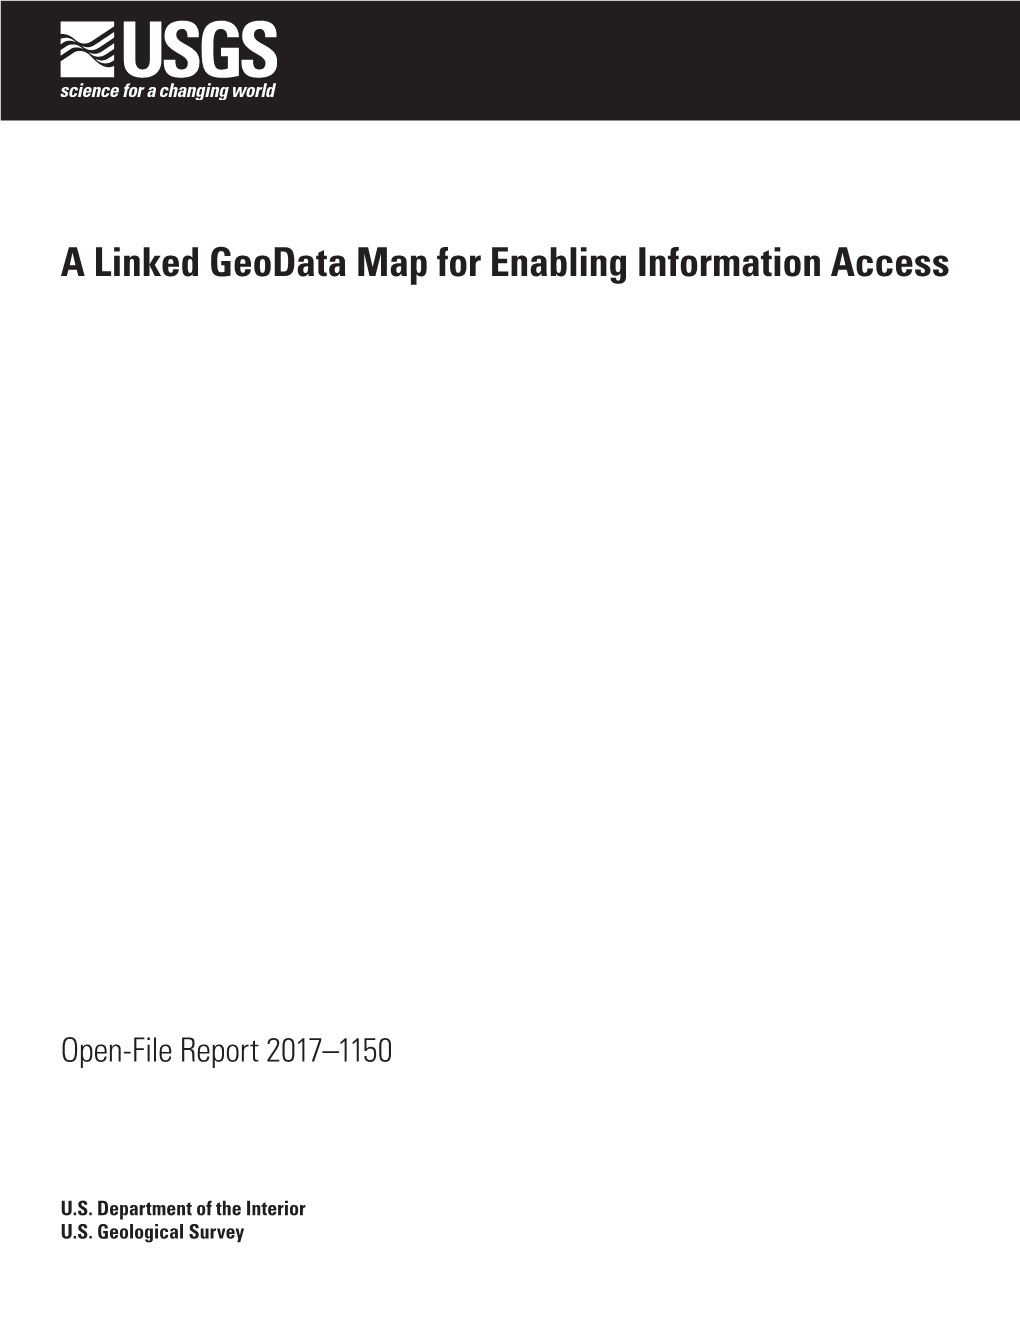 A Linked Geodata Map for Enabling Information Access